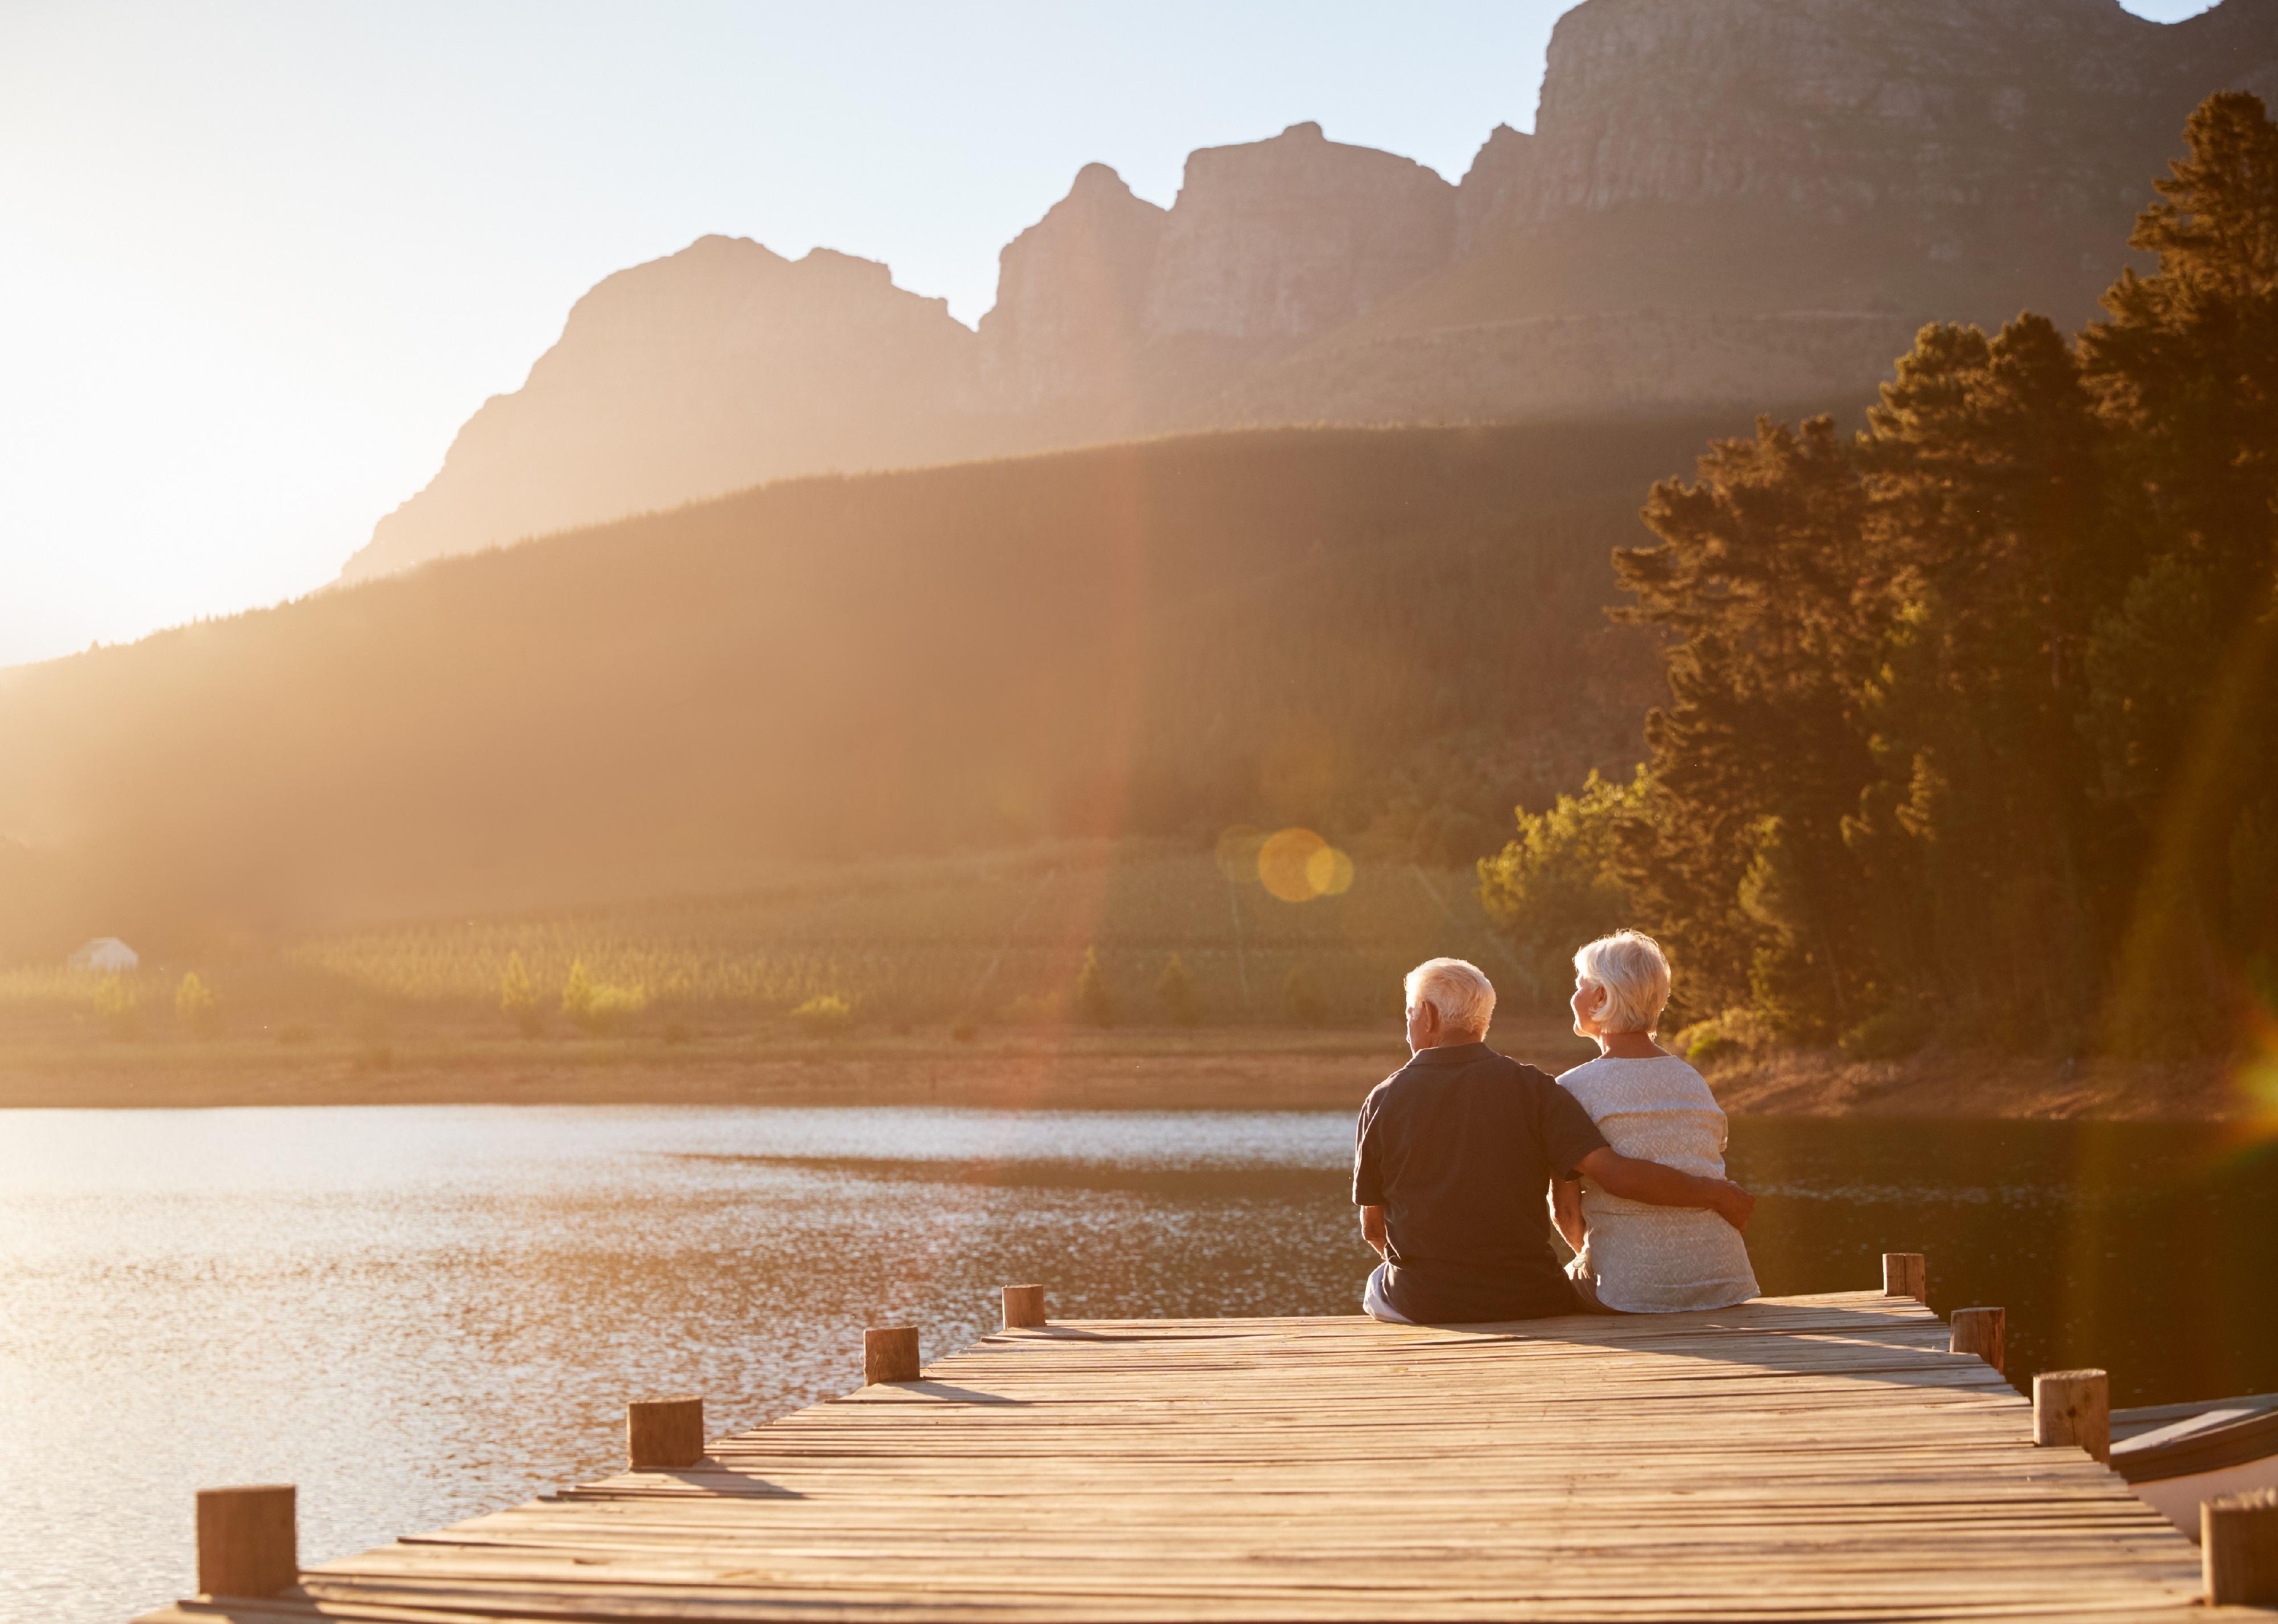 Senior couple sitting on a wooden dock by a lake.